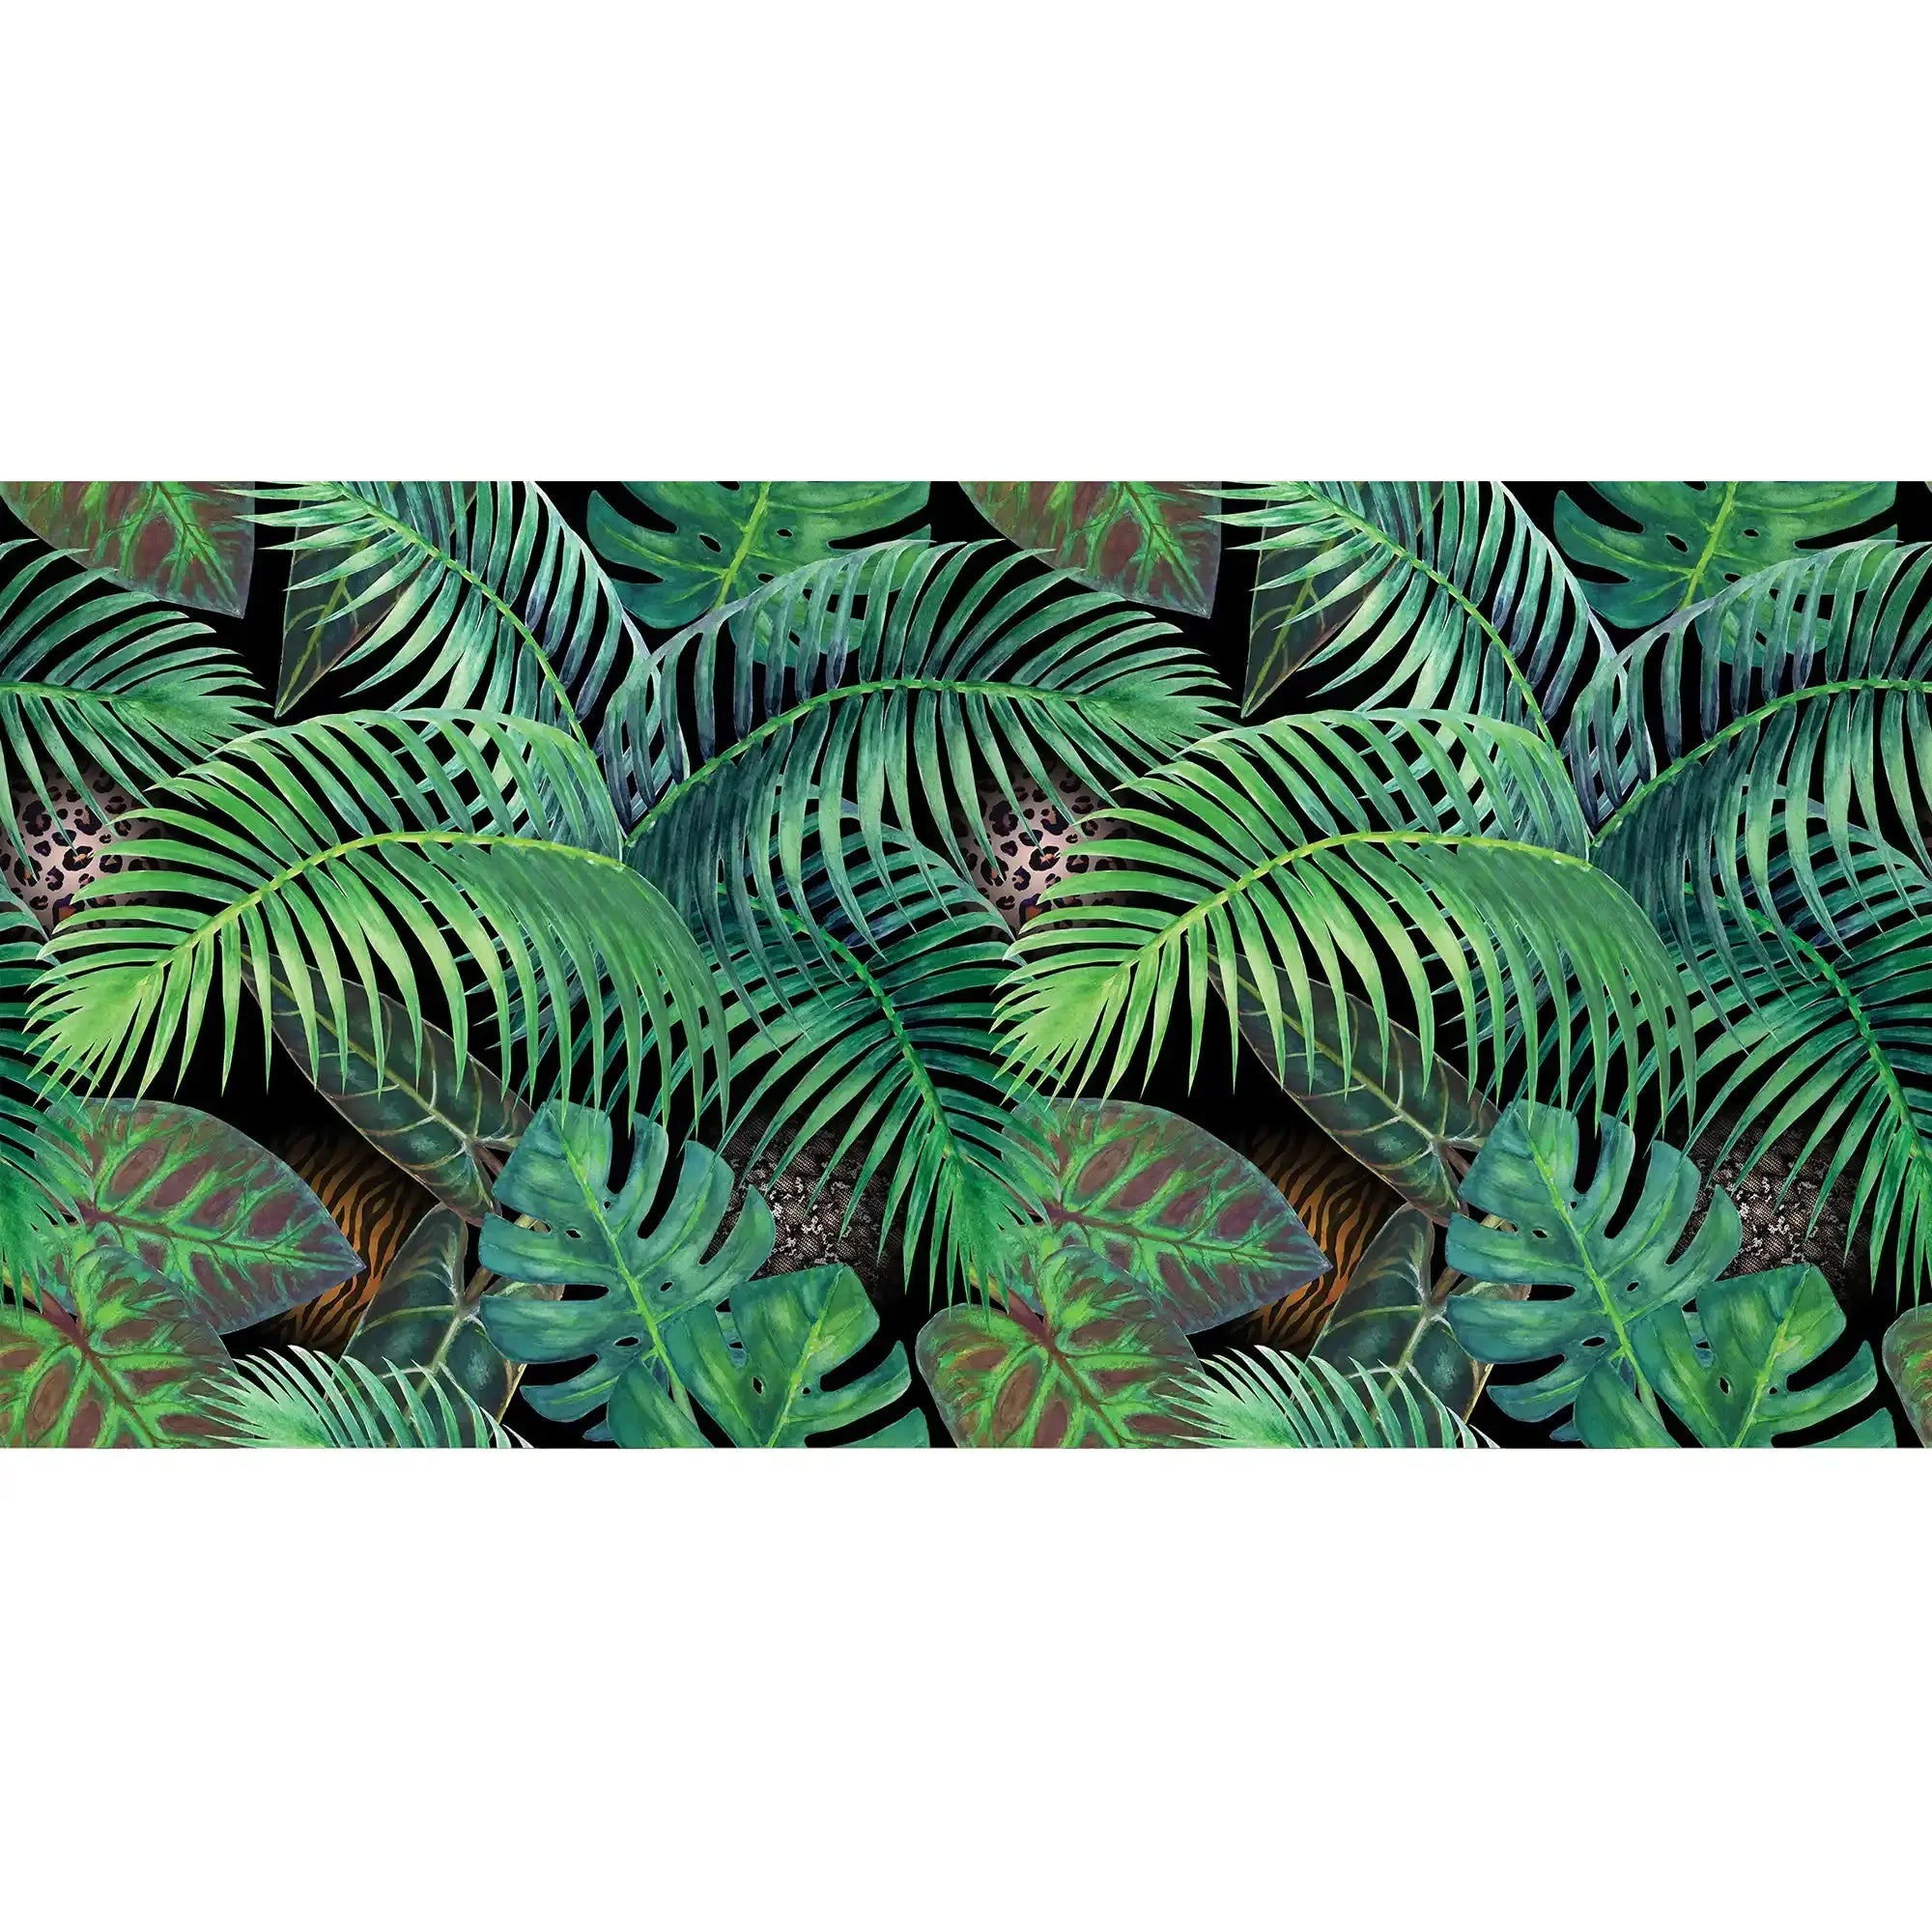 3096-A / Jungle Leaves Wallpaper - Tropical Botanical Wall Decor - Self Adhesive, Peel and Stick - Modern and Contemporary - Artevella